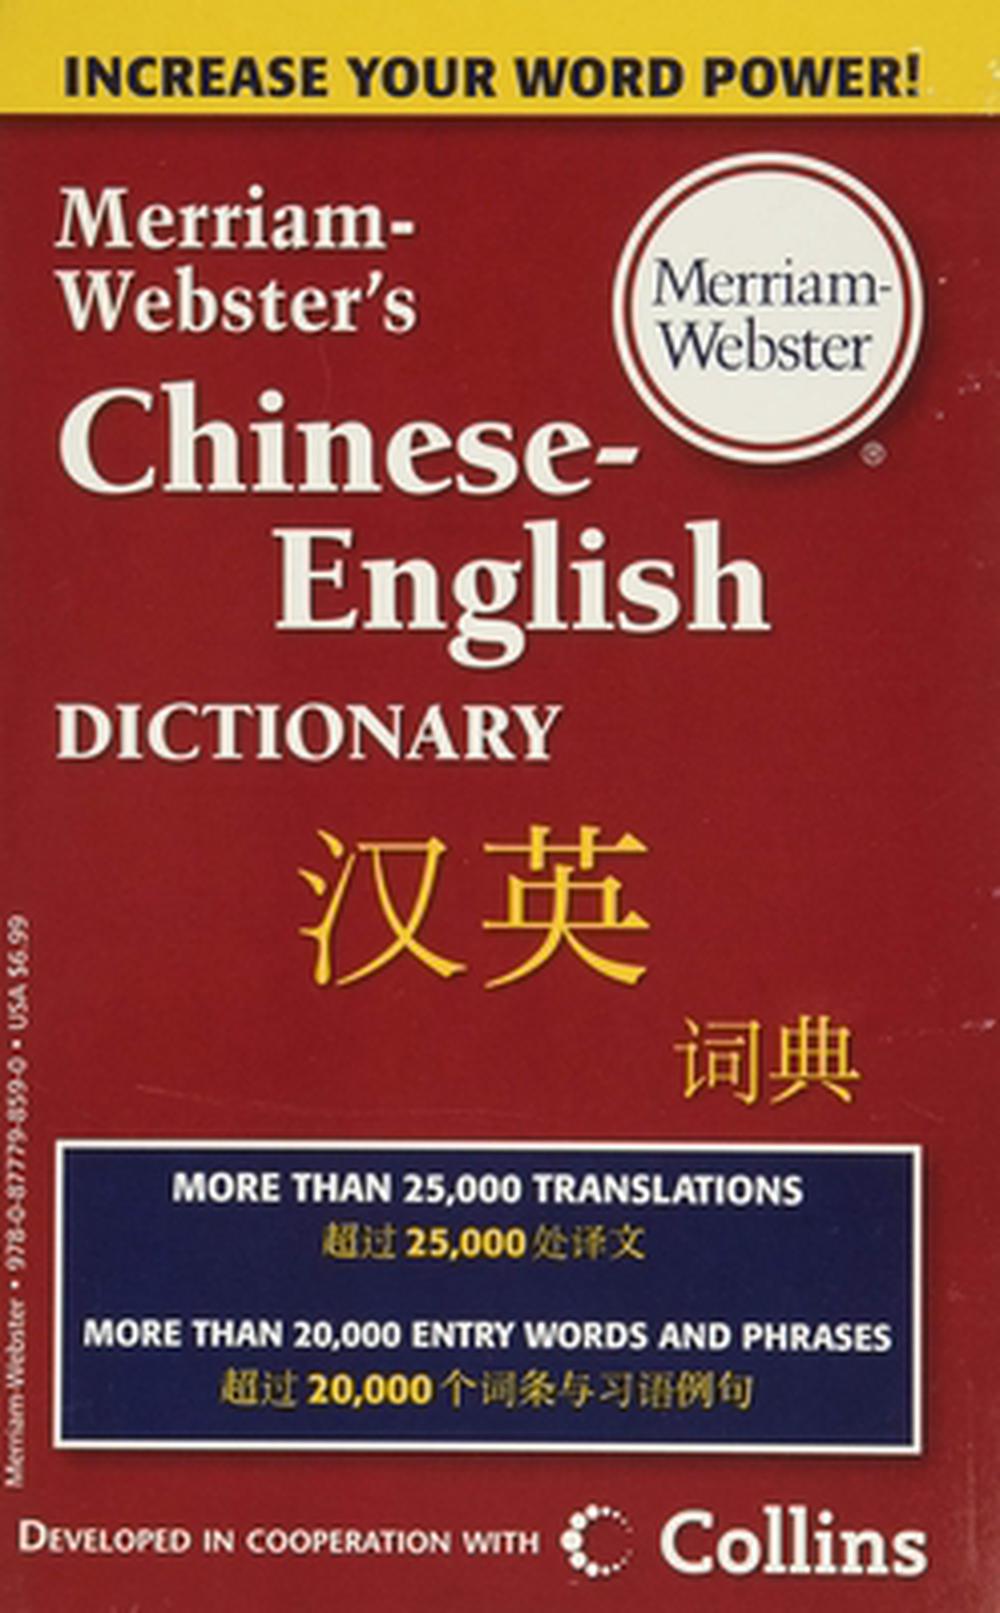 mate translate into chinese